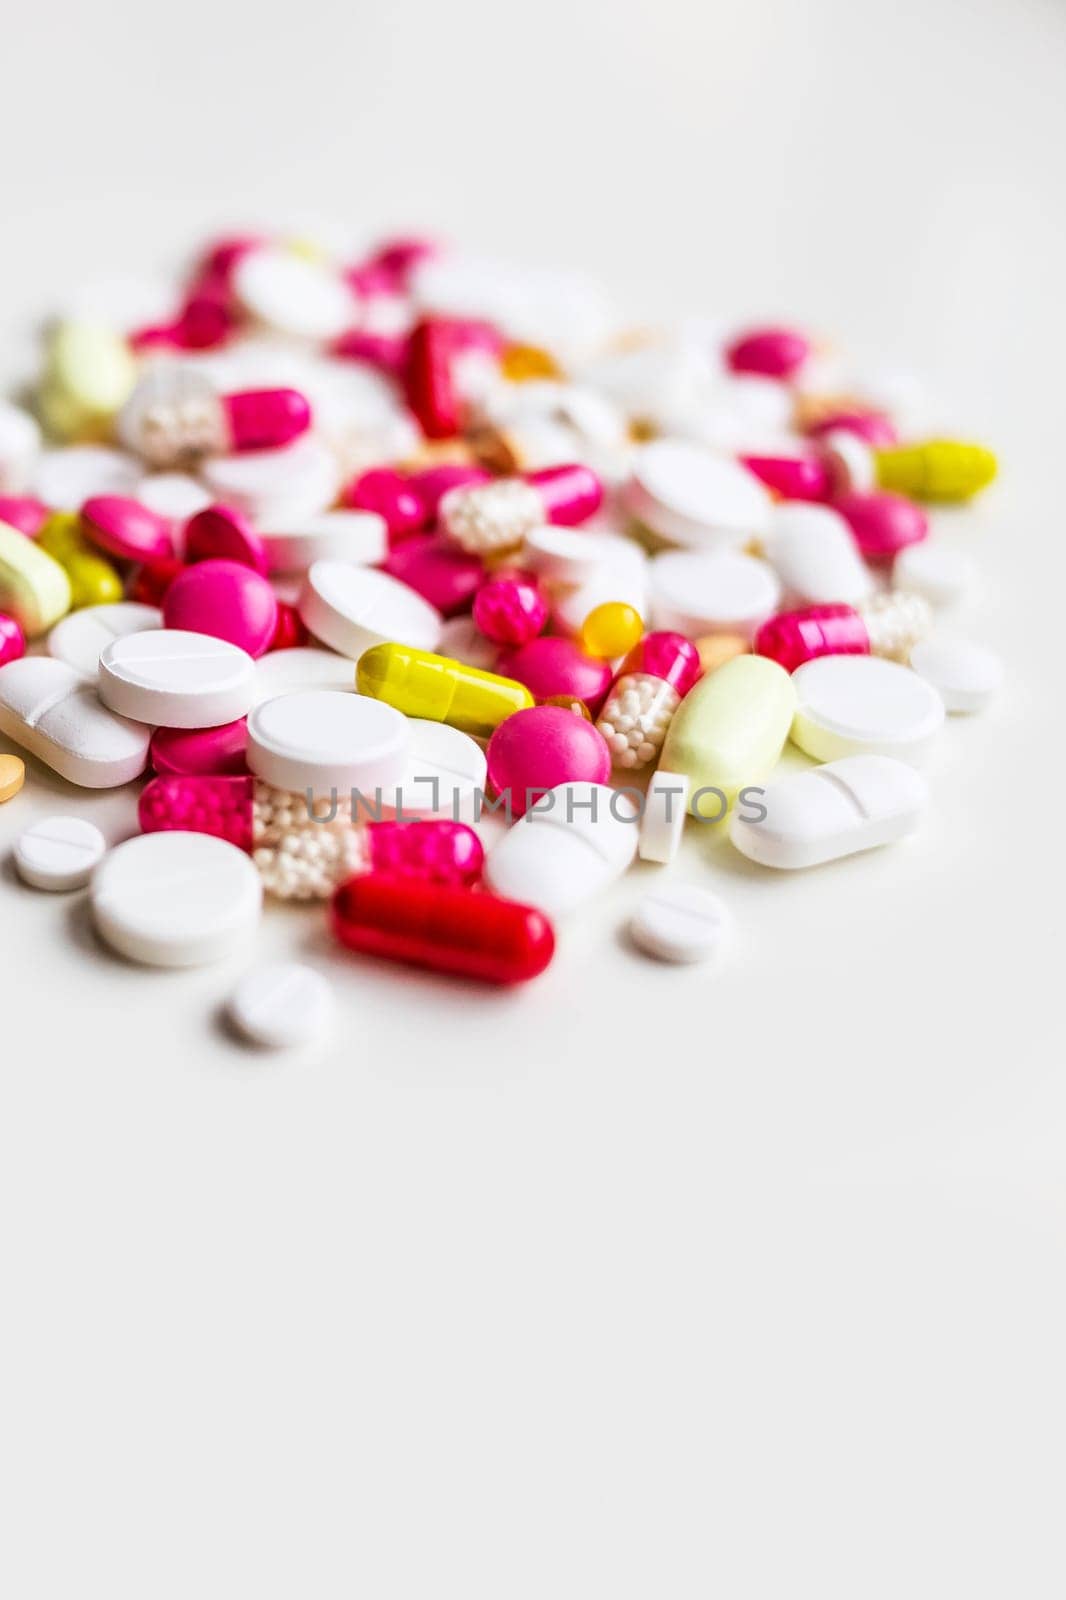 Pile of colorful medicine pills, white, blue, yellow and red, sitting on white background